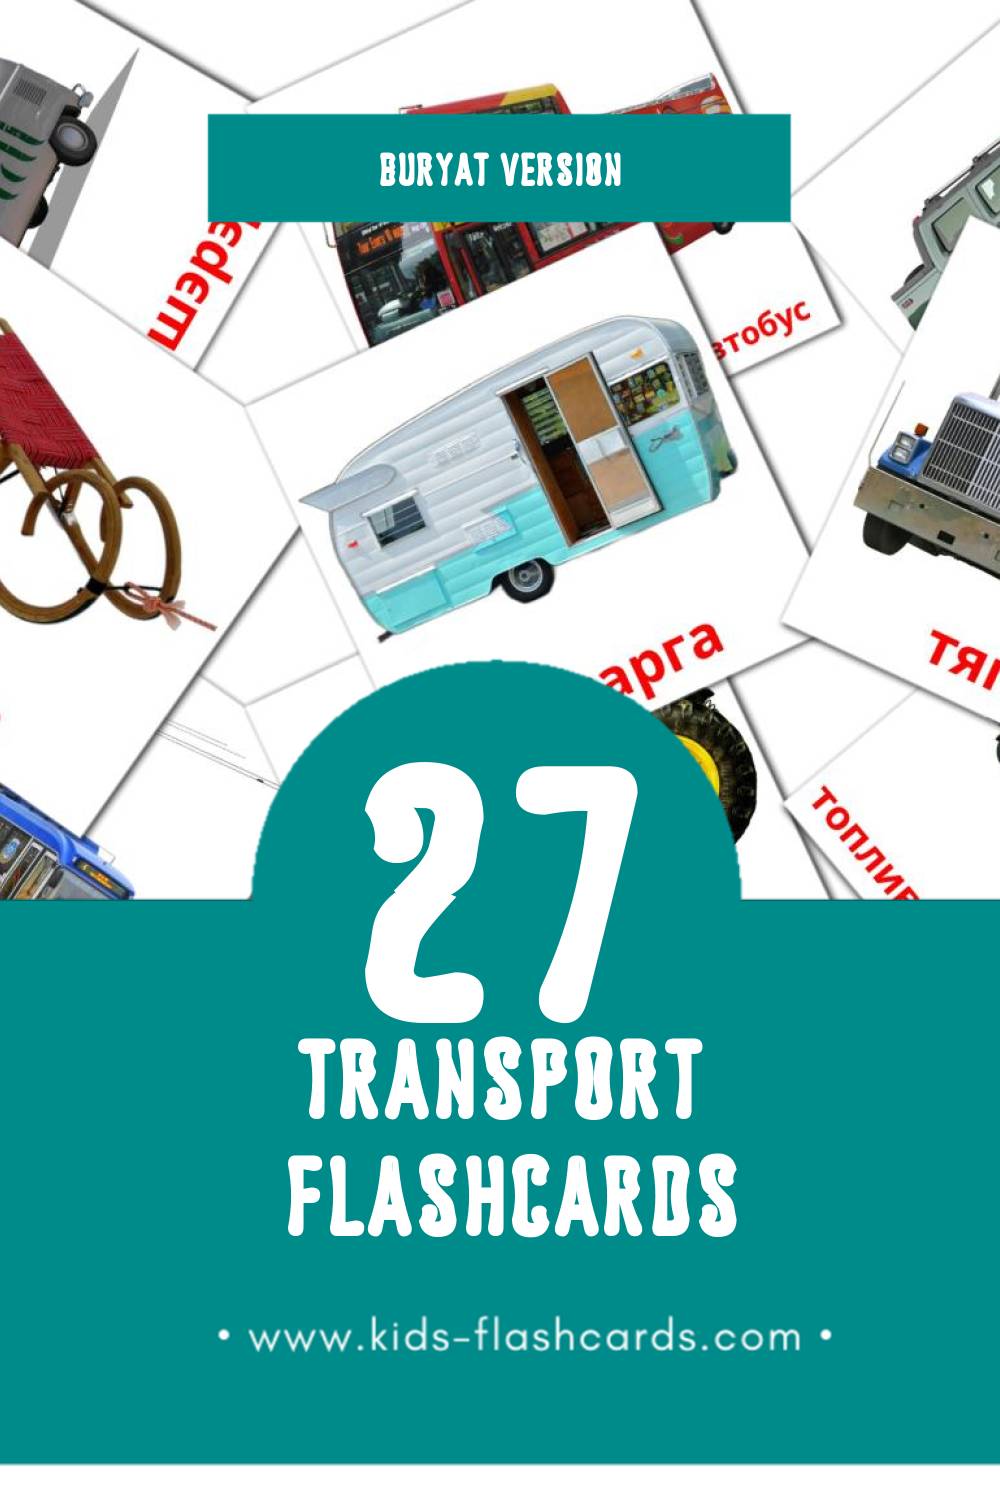 Visual Транспорт Flashcards for Toddlers (27 cards in Buryat)